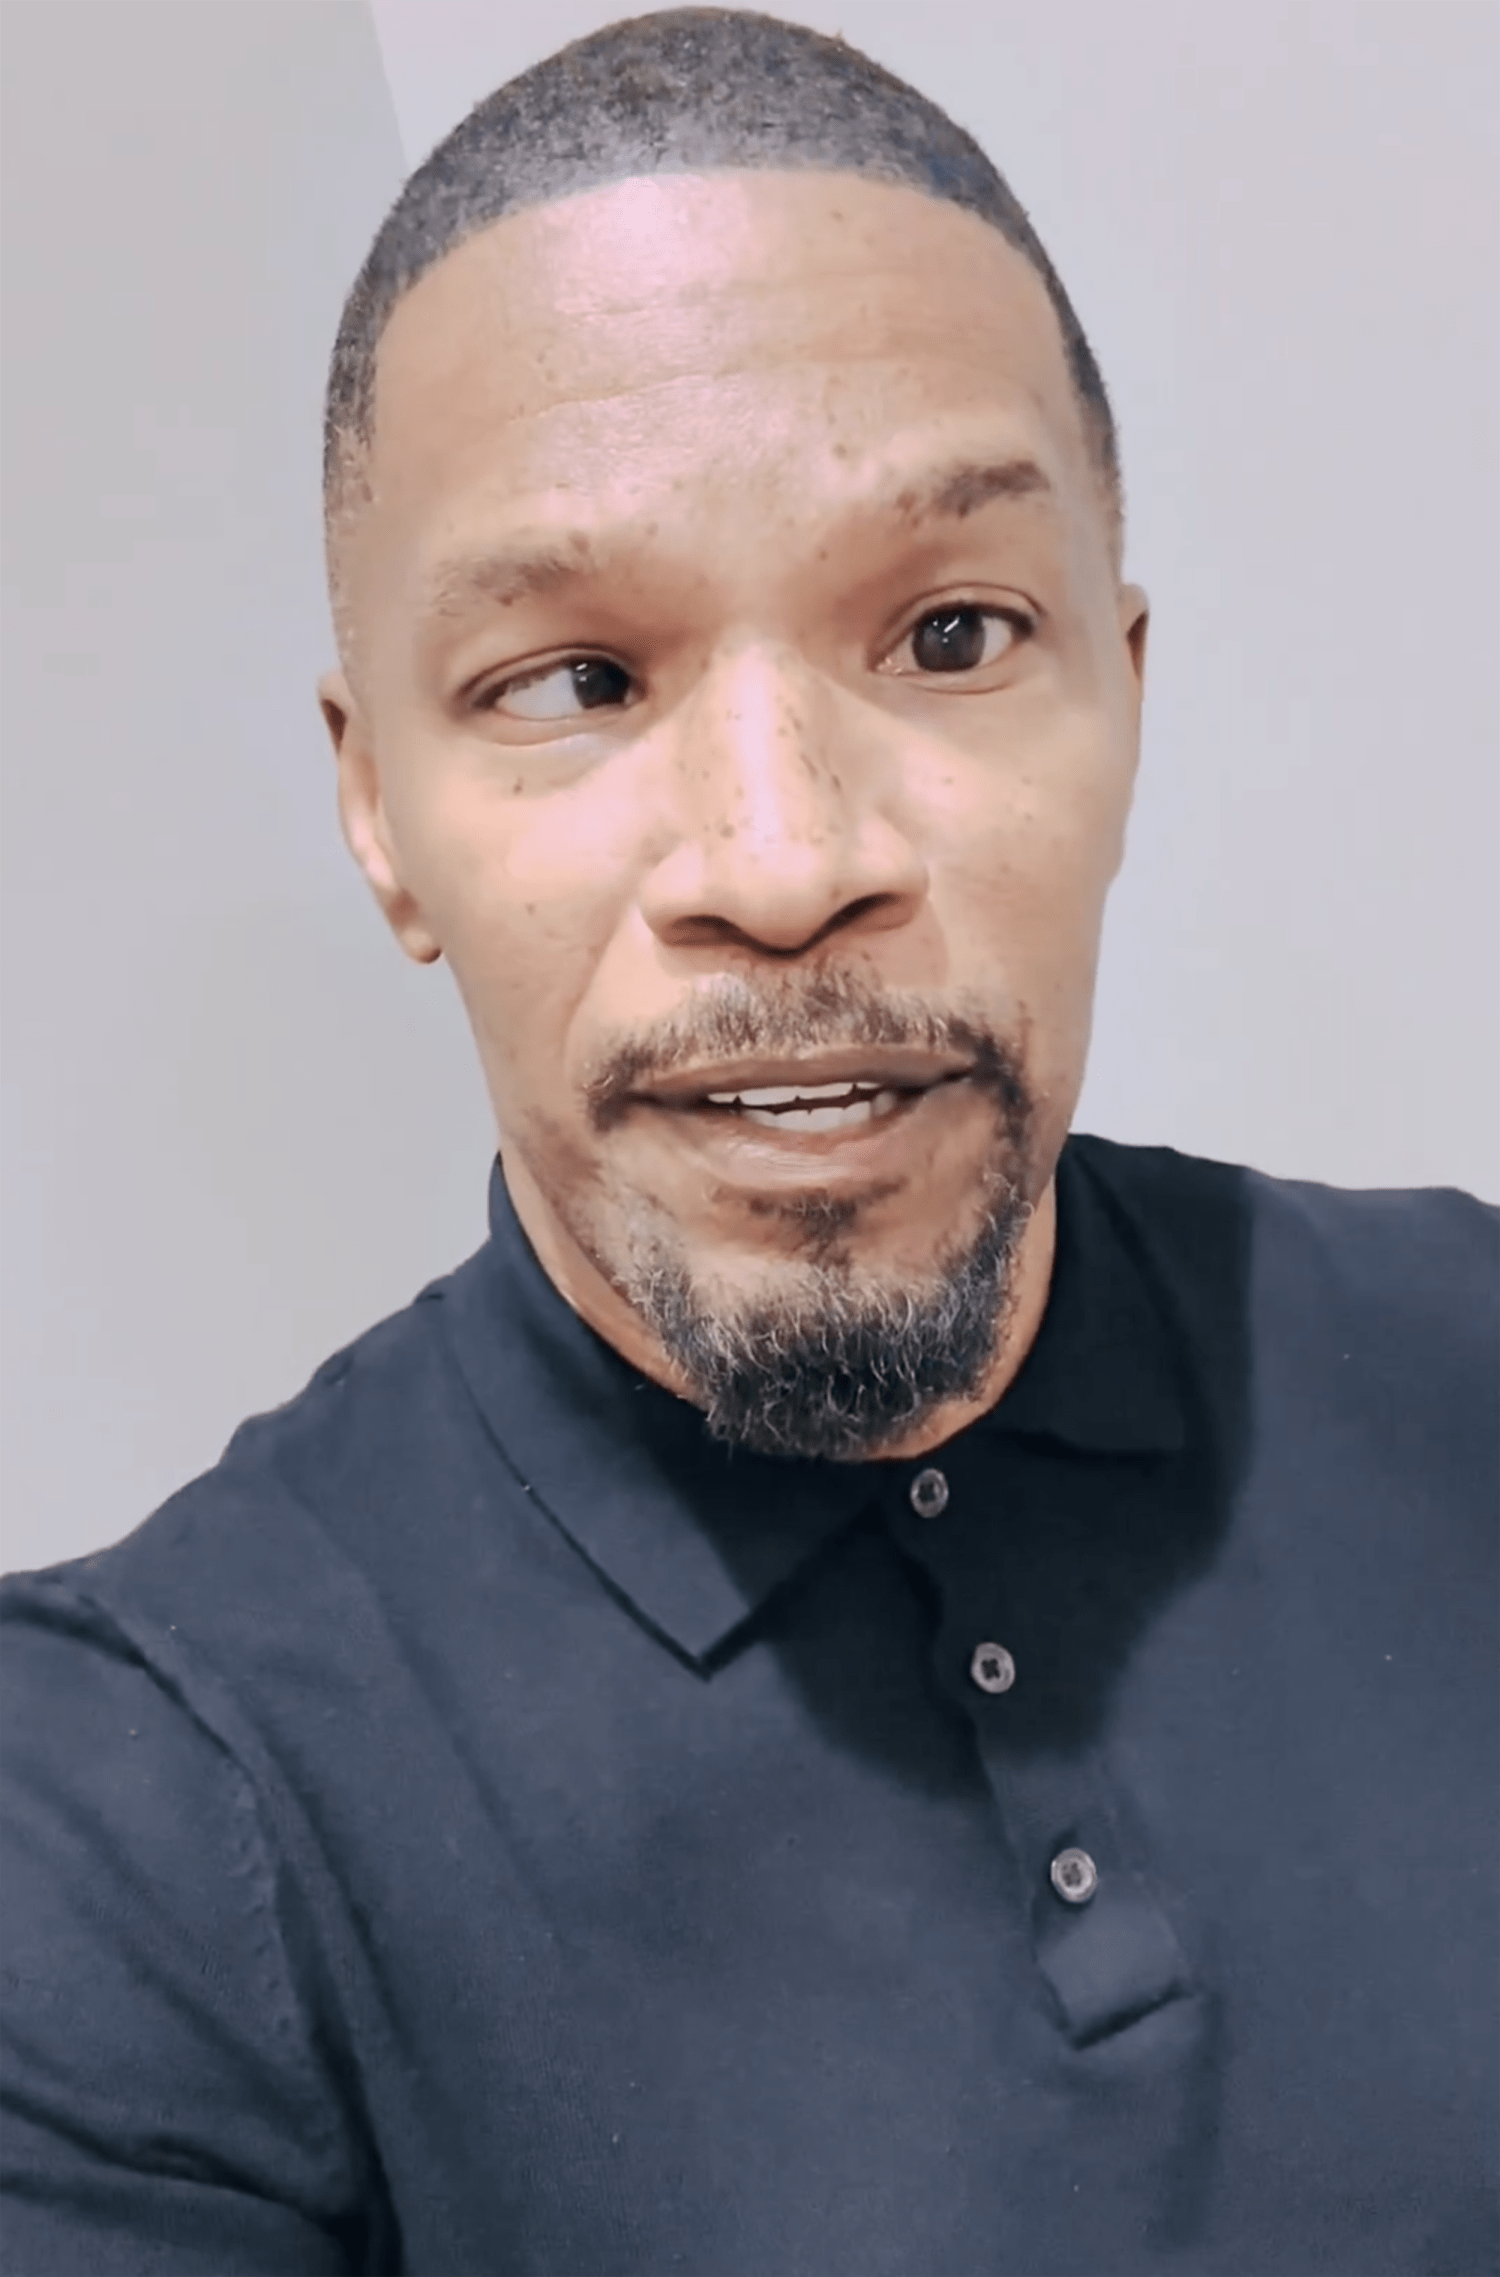 Jamie Foxx Gives Health Update in New Video, Thanks Family for Support